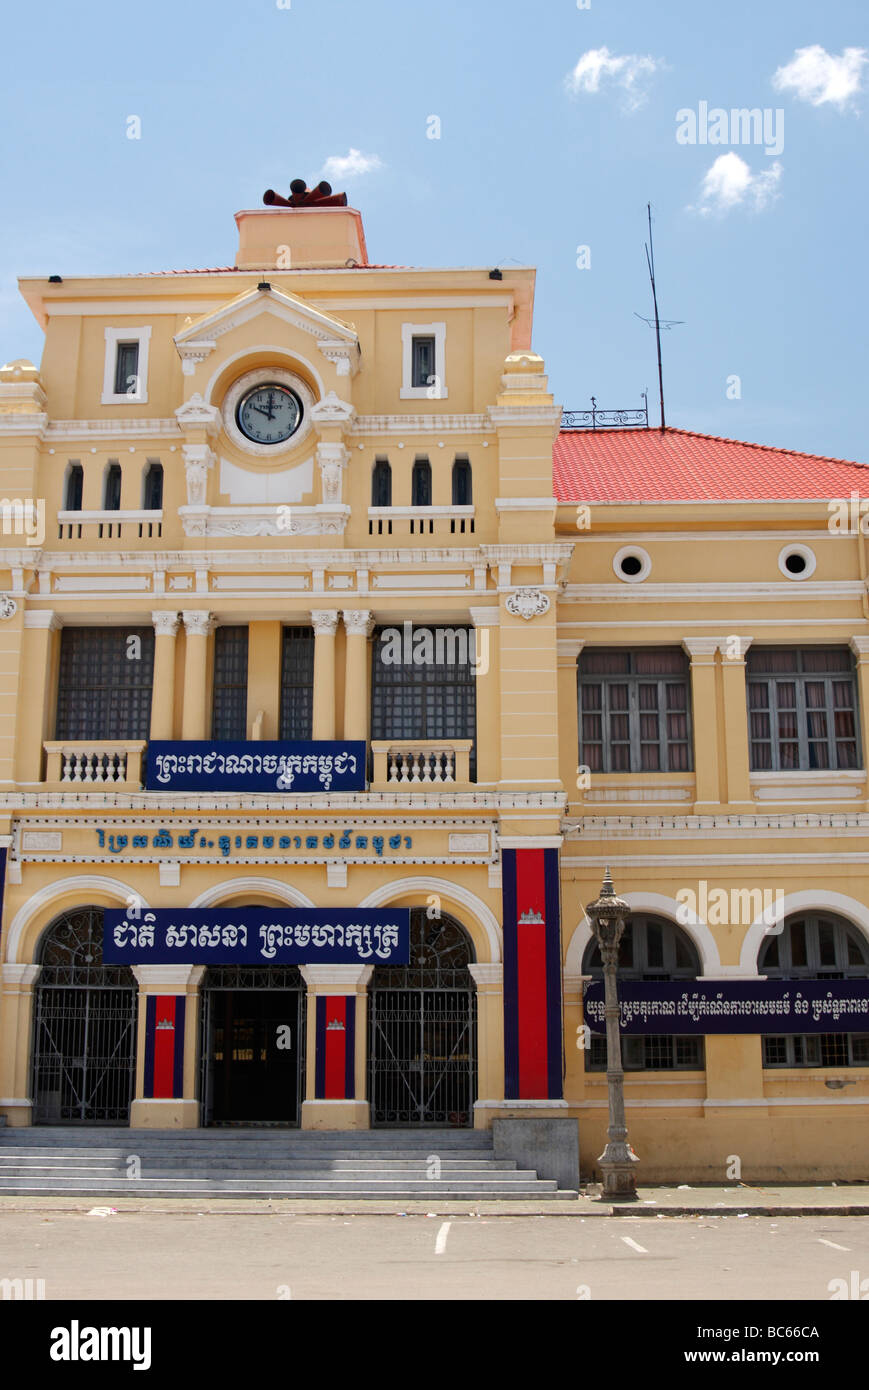 "Phnom Penh" "Post Office", Cambodia, restored [French colonial] building architecture Stock Photo